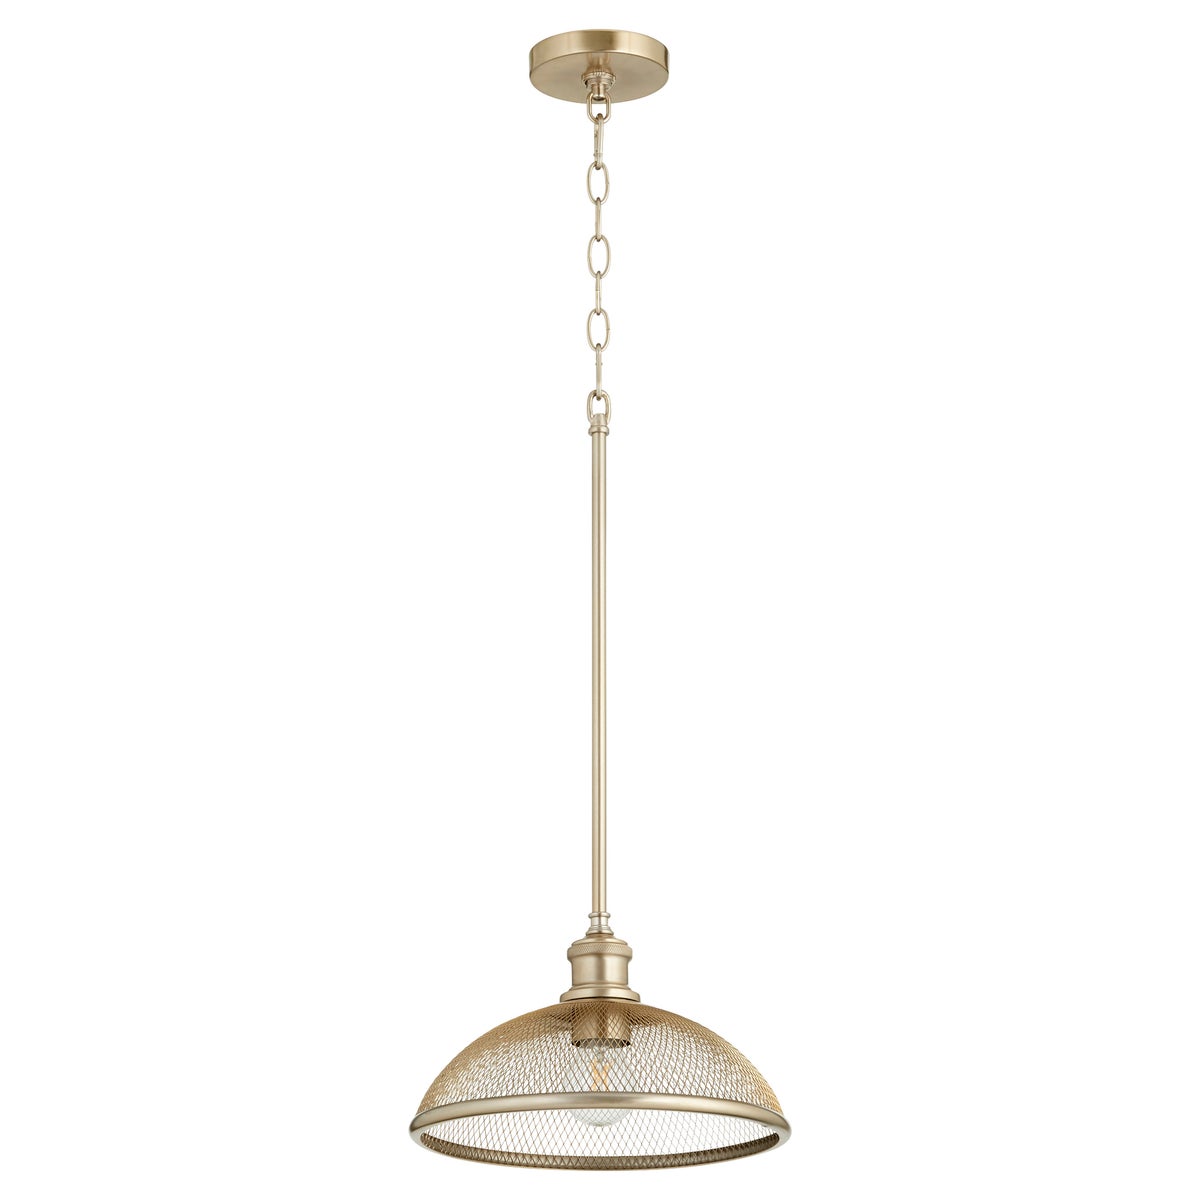 Industrial Pendant Light with mesh silhouette and crisscross patterns, showcasing subtle bulbs. Versatile transitional styling for contemporary and traditional settings. Quorum International, 100W, 1-bulb fixture. 12"W x 7.25"H. UL Listed, Damp Location. 2-year warranty.